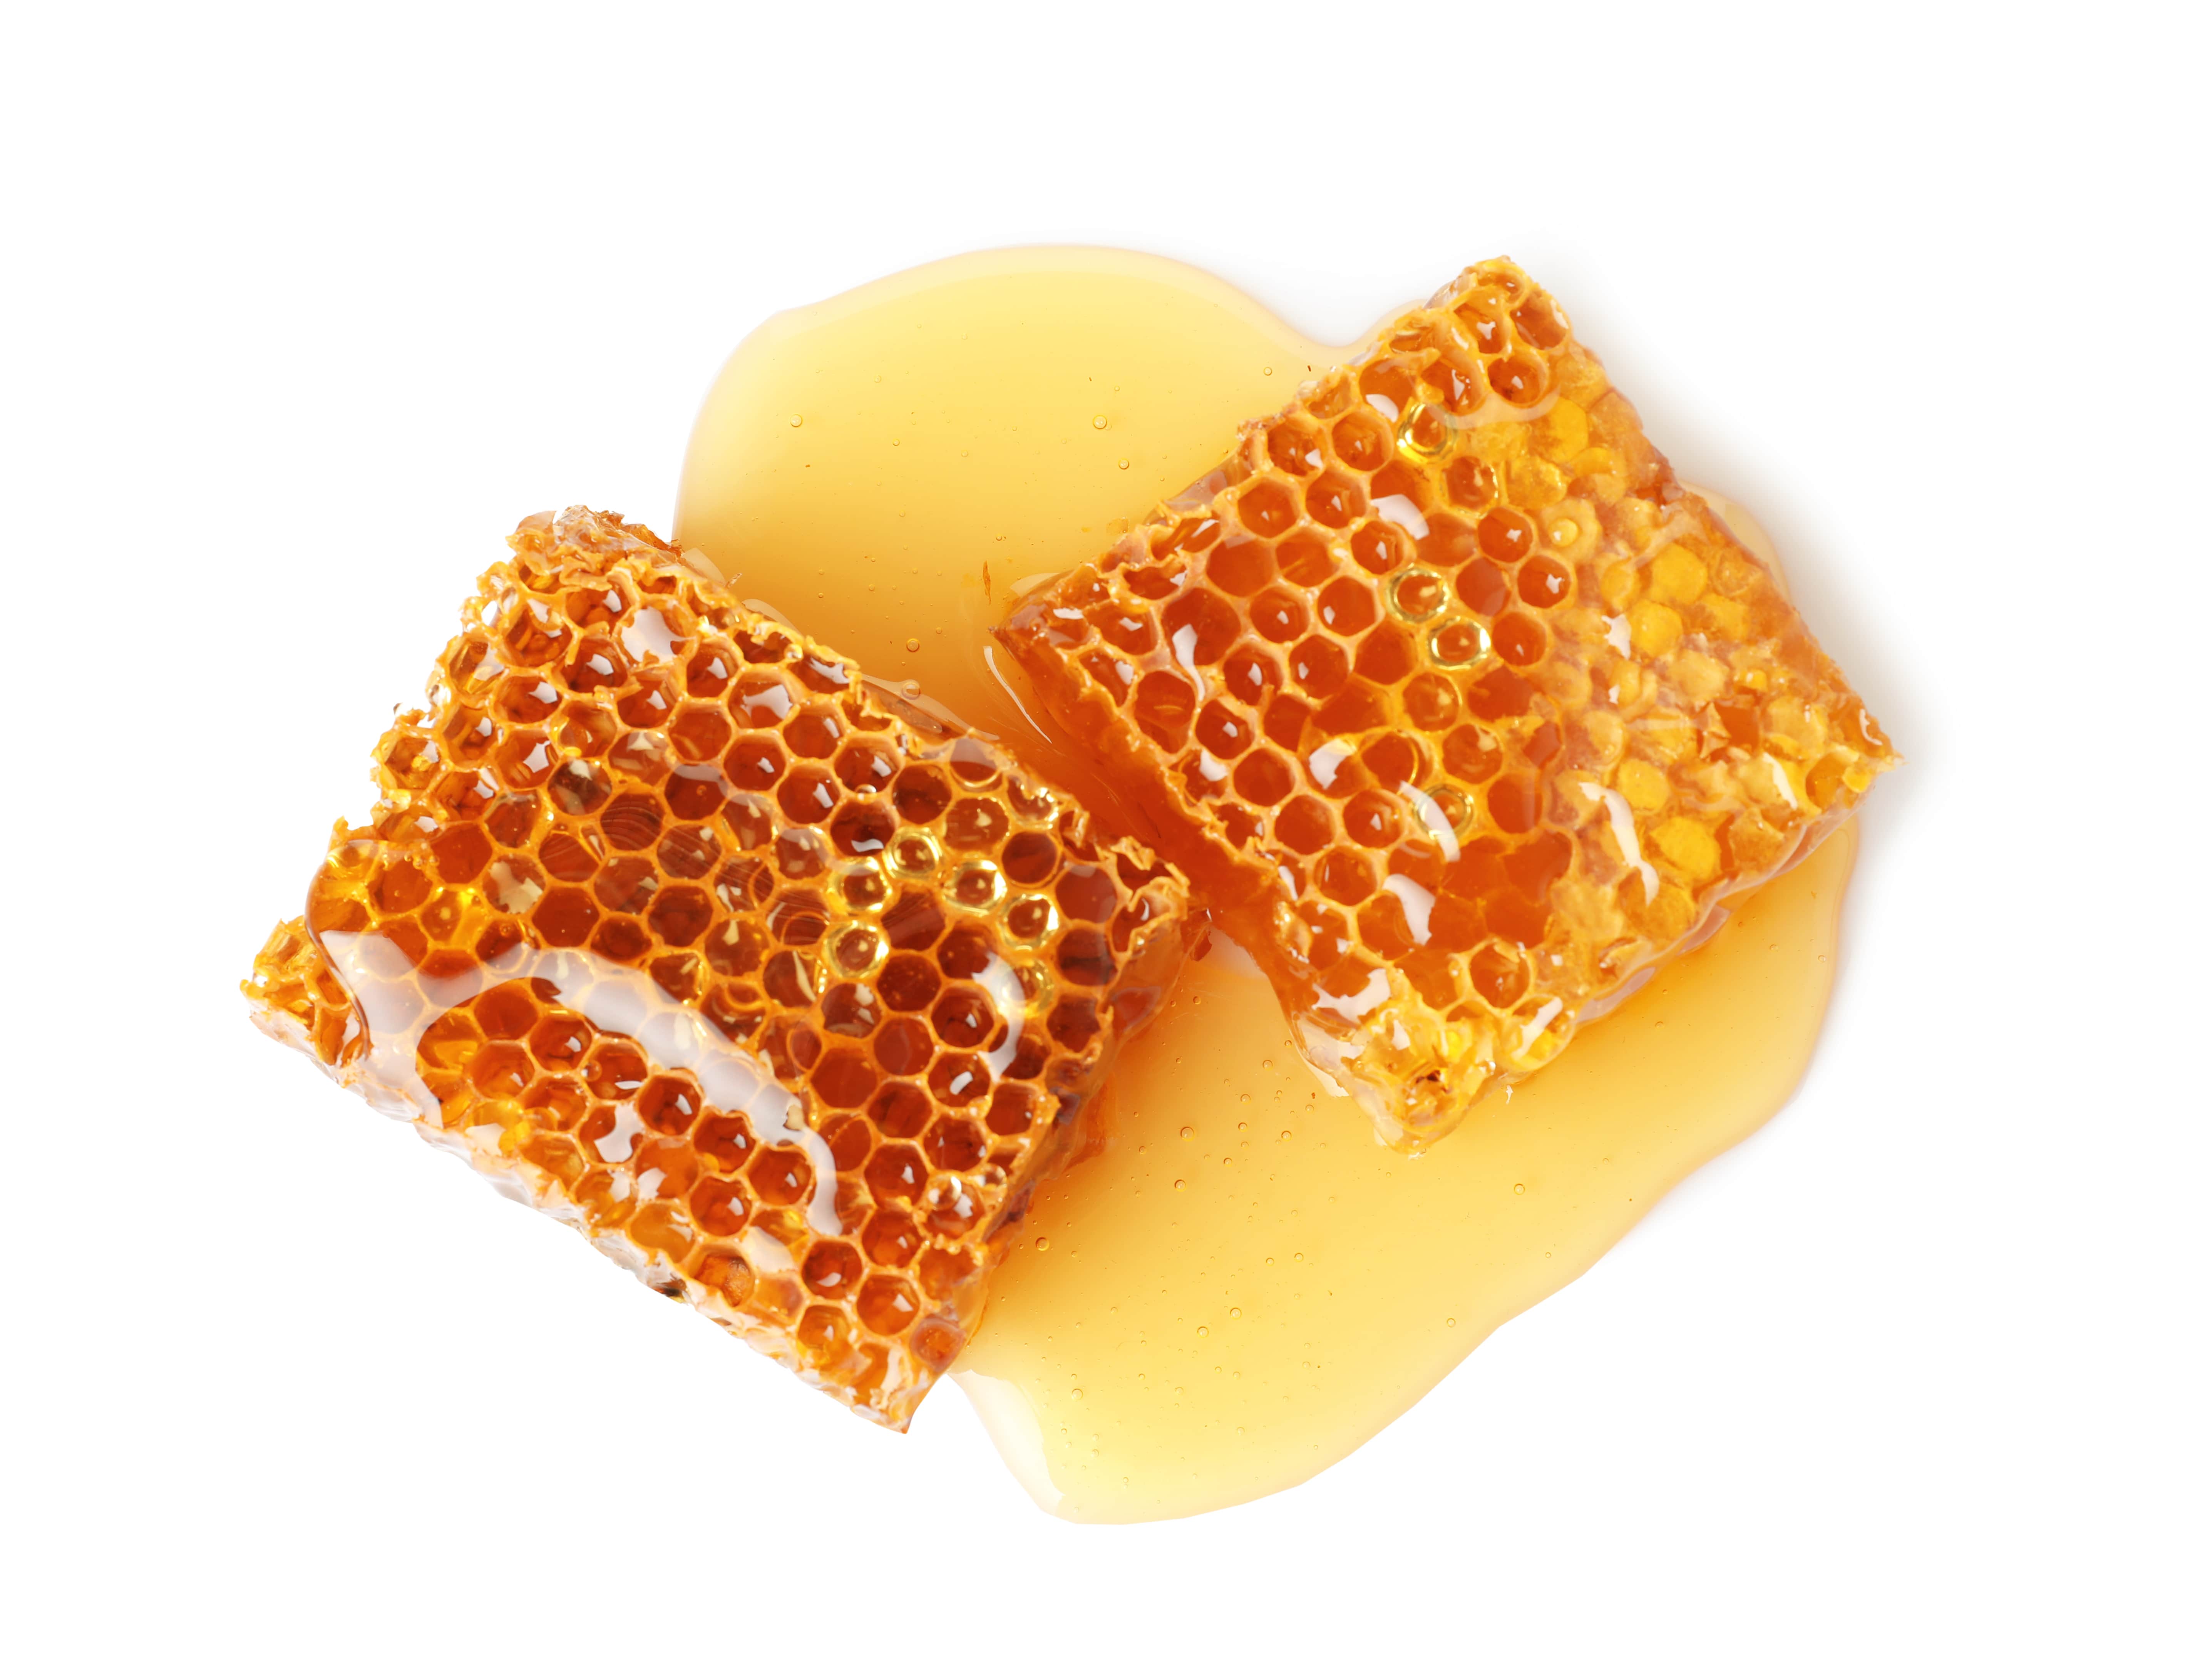 Beeswax Absolute (CAS N° 8012-89-3)